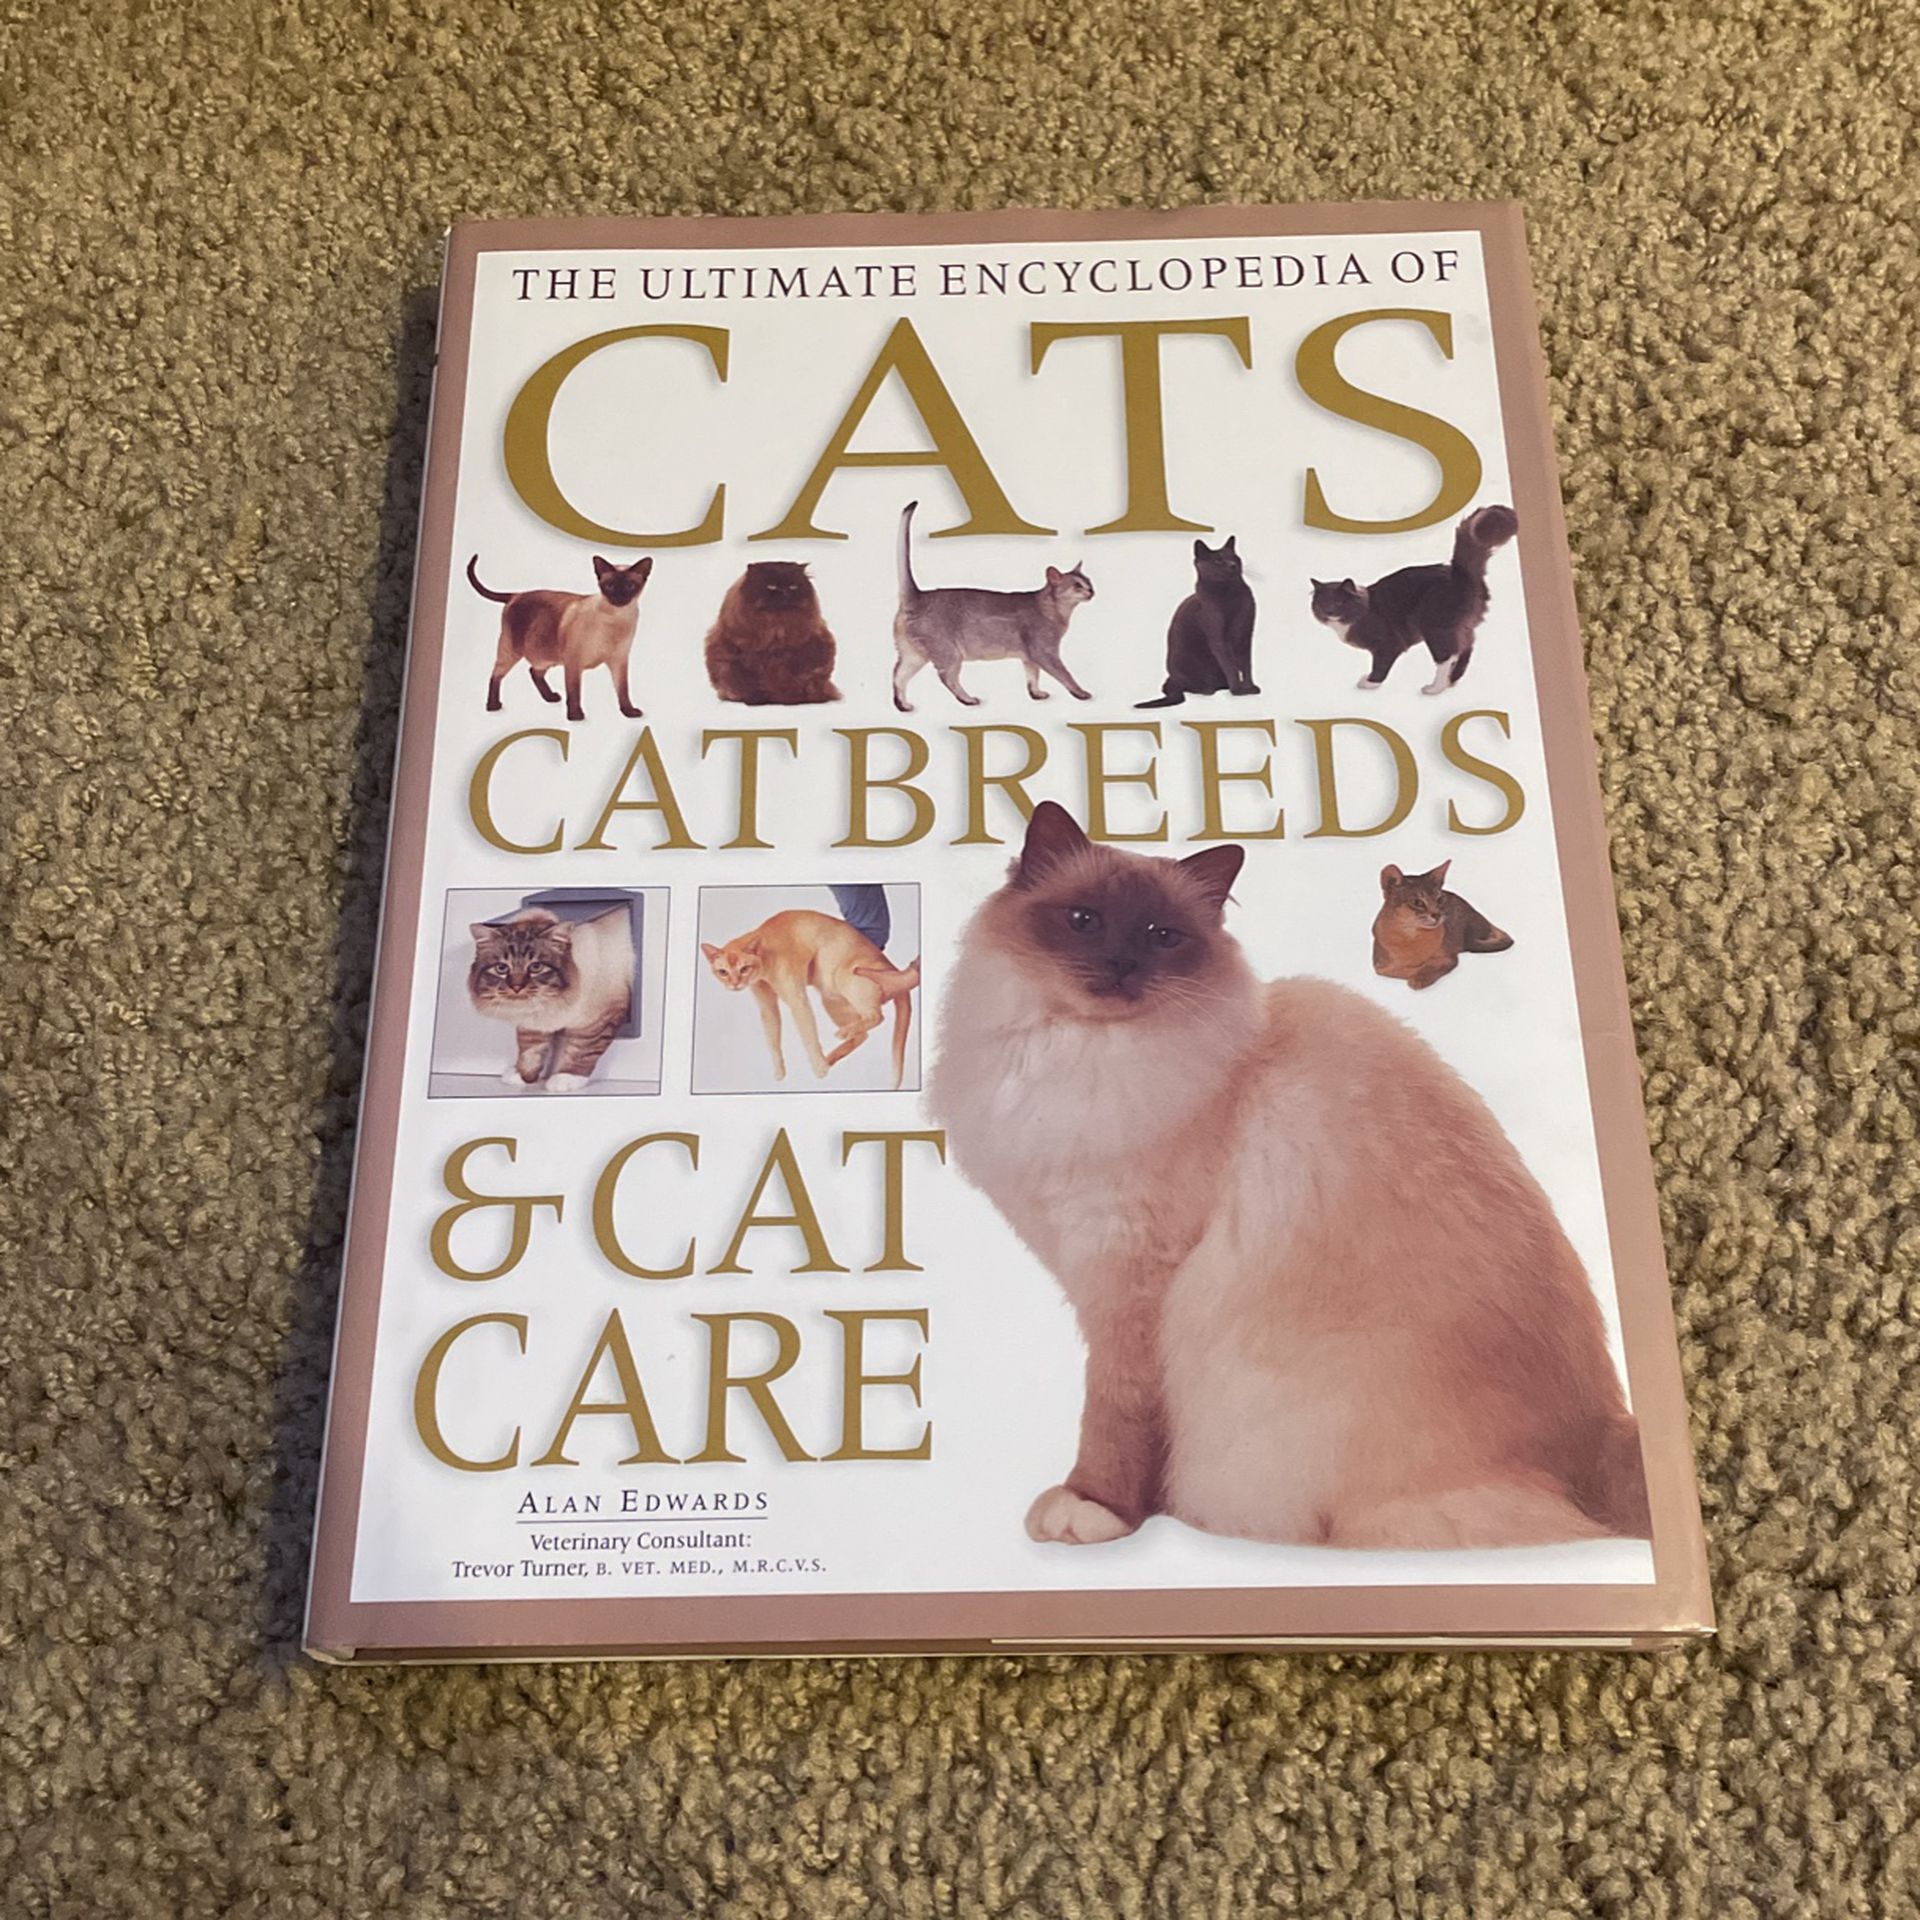 Cat Breeds Encyclopedia [ON HOLD FOR DANIEL A.]